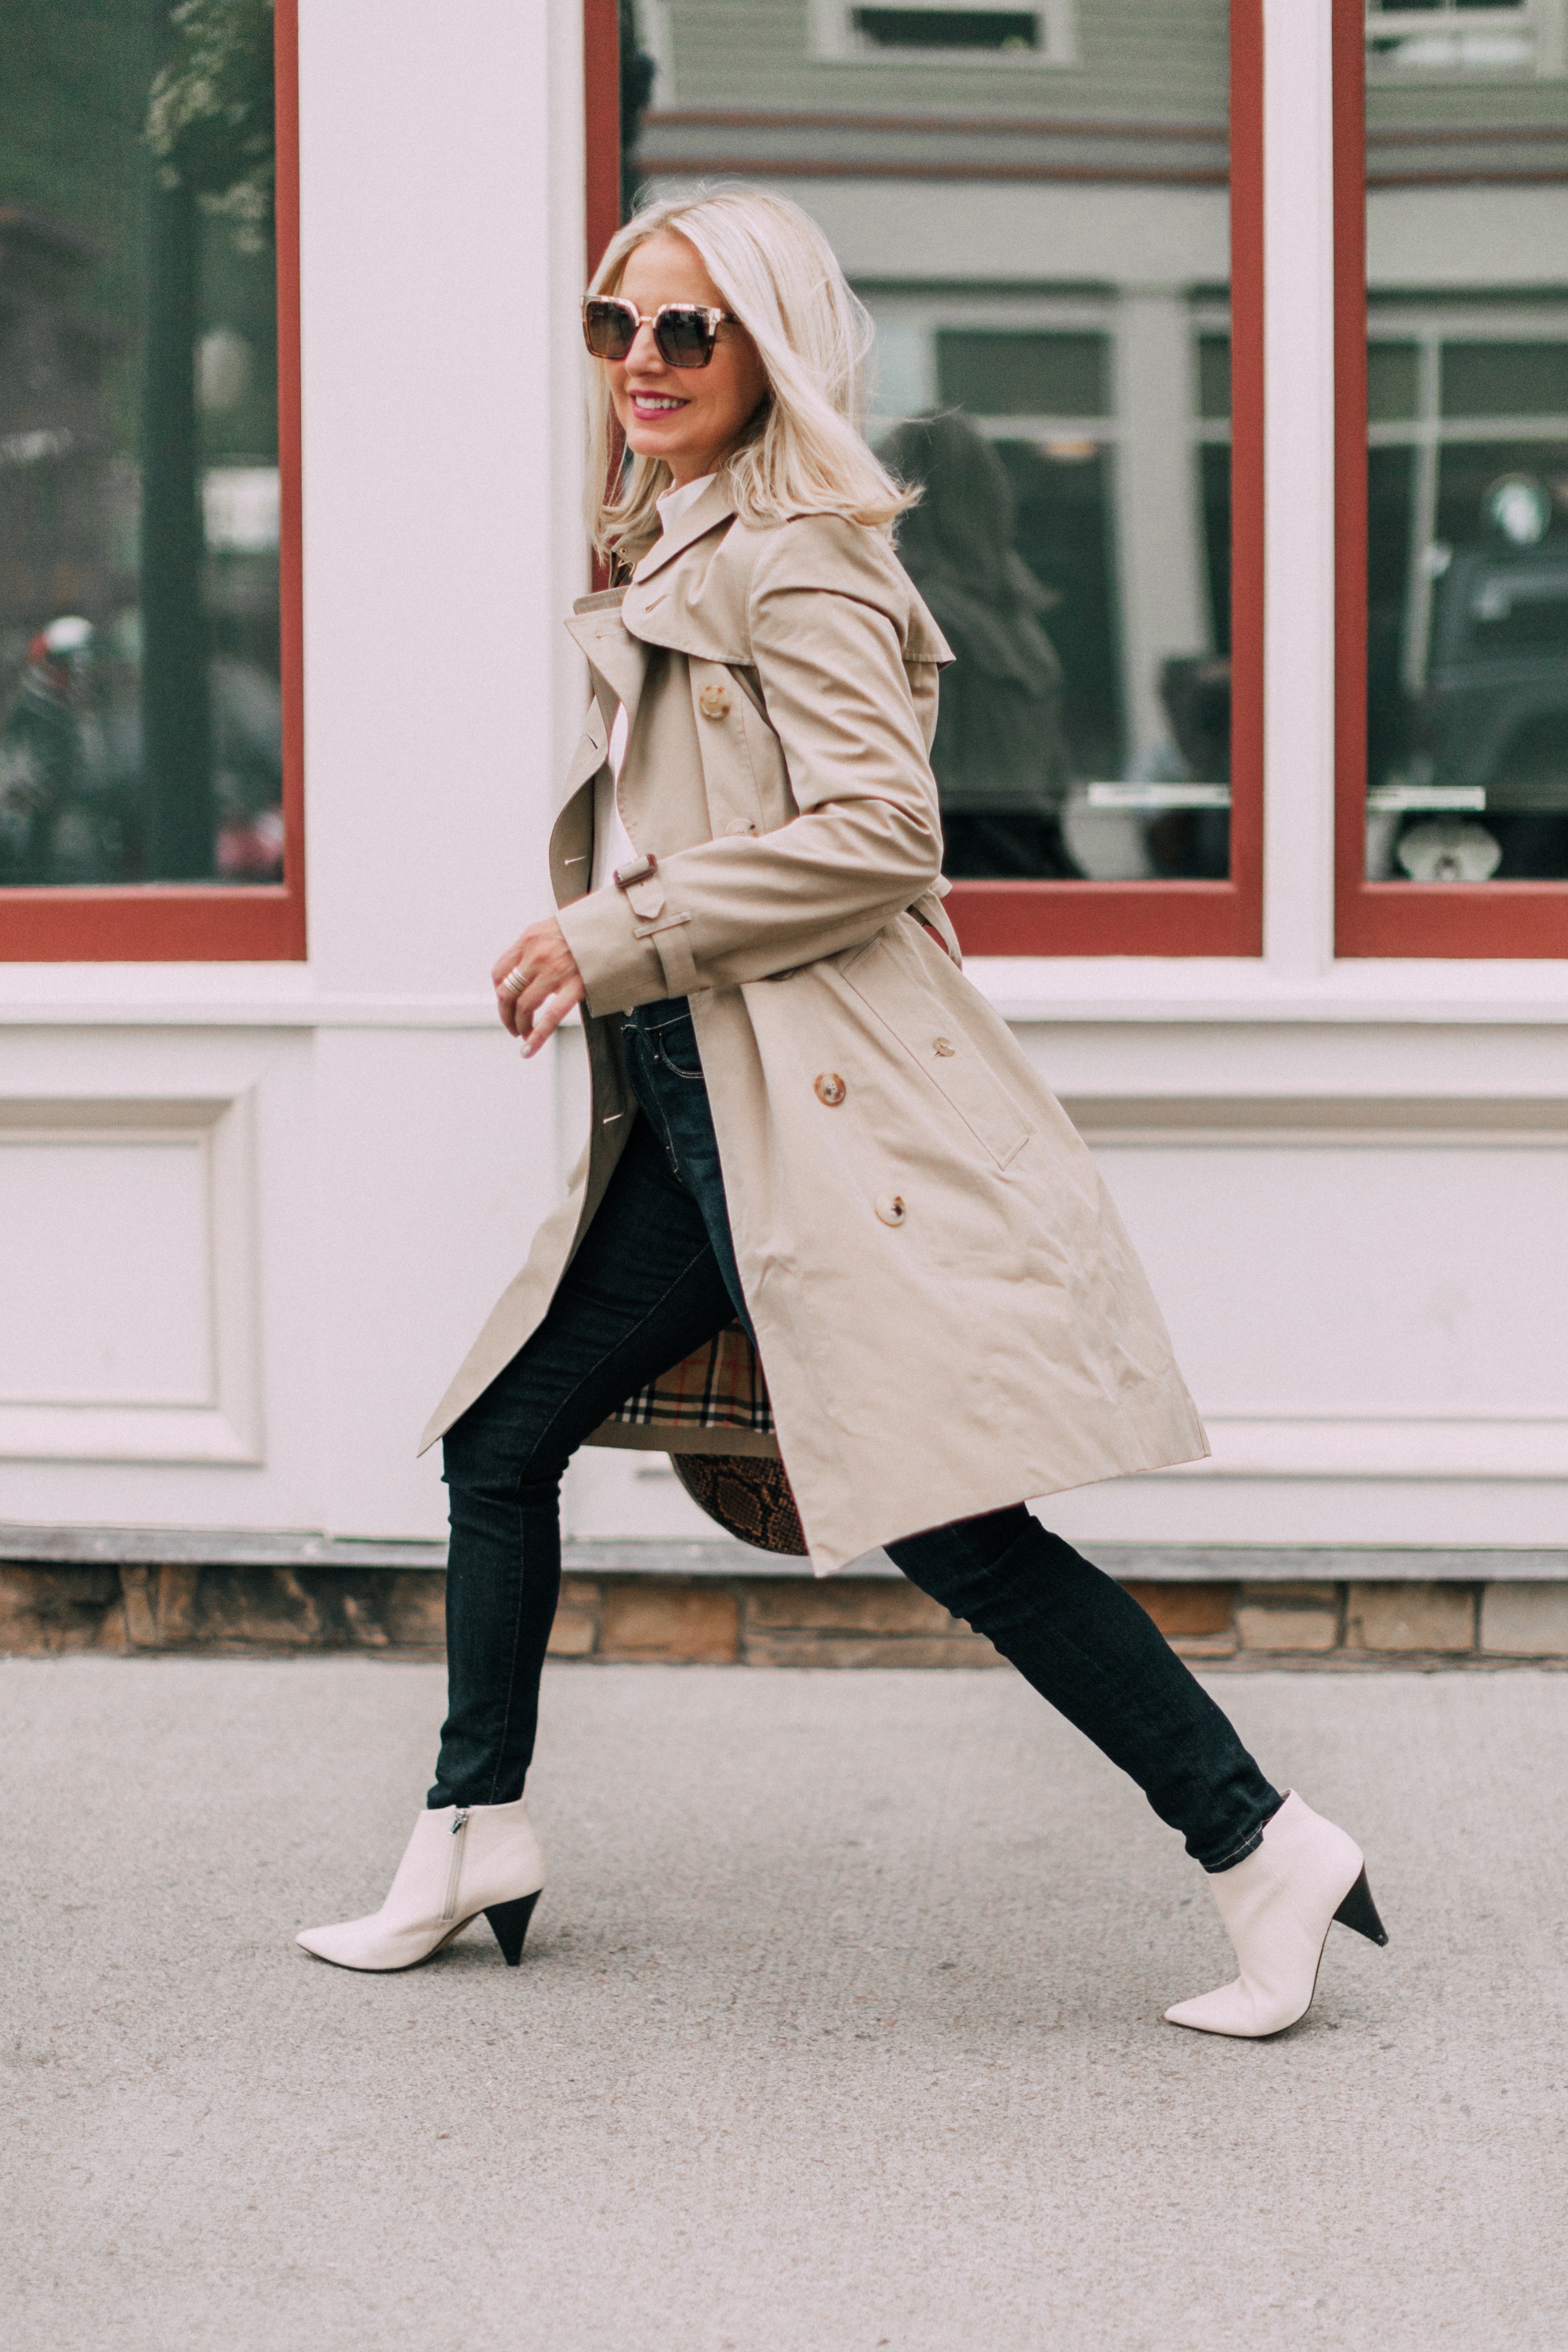 How To Update Your Look, Fashion blogger Erin Busbee of BusbeeStyle.com wearing a white top by Tibi, blue jeans by L'Agence, white cone heel booties by Vince Camuto, python moon bag by Staud, and tan trench coat by Burberry in Telluride, Colorado